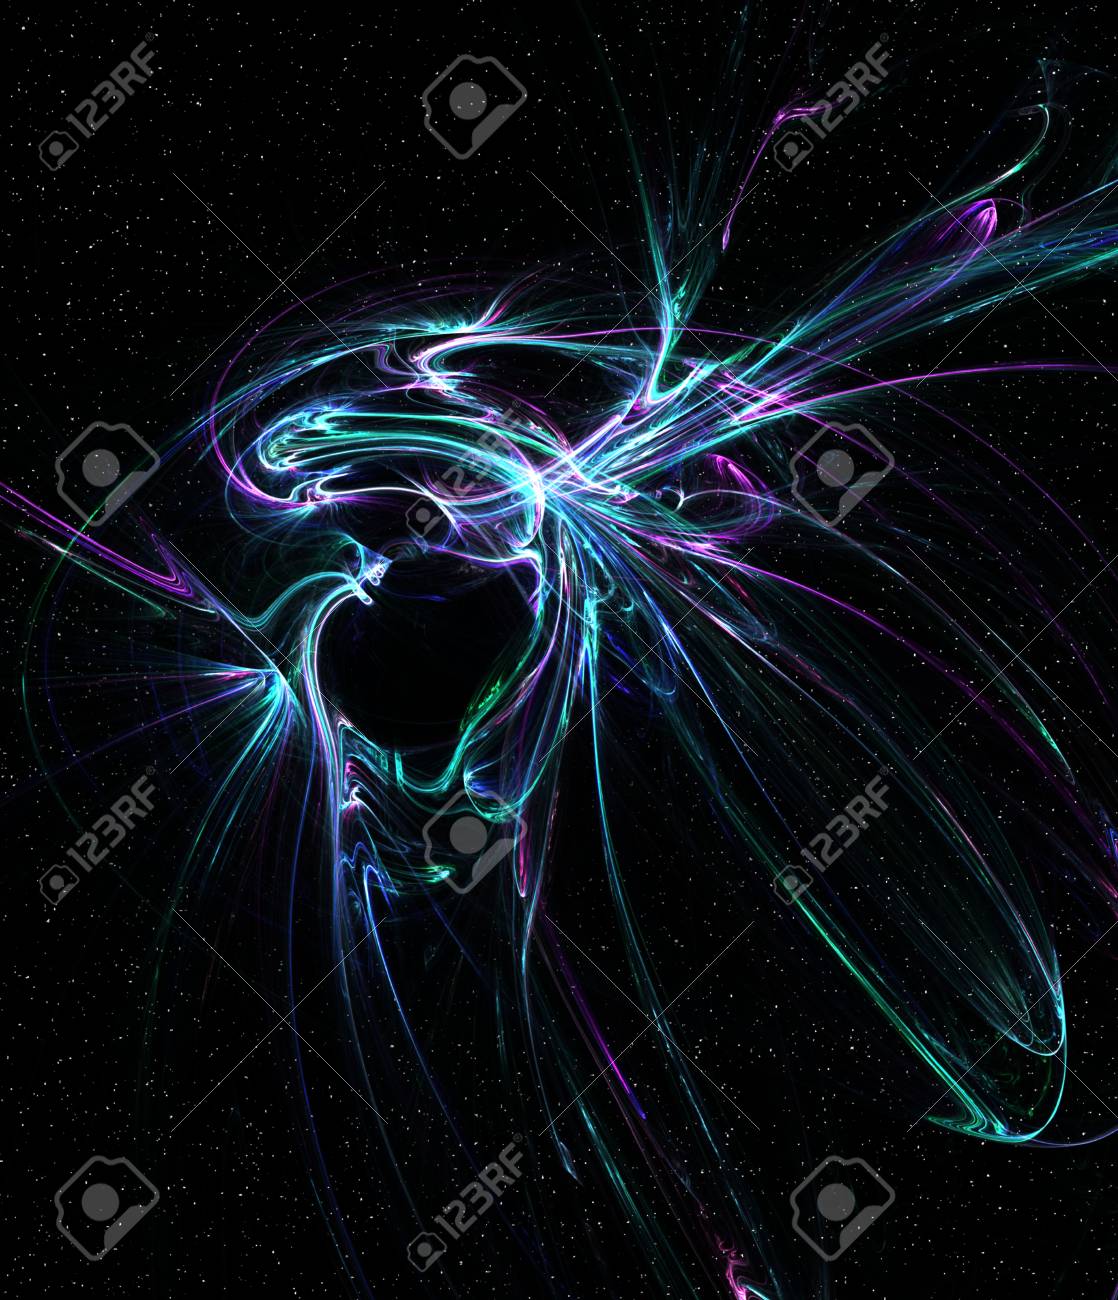 Space Fantasy Black Hole Anomaly Abstract Dark Background